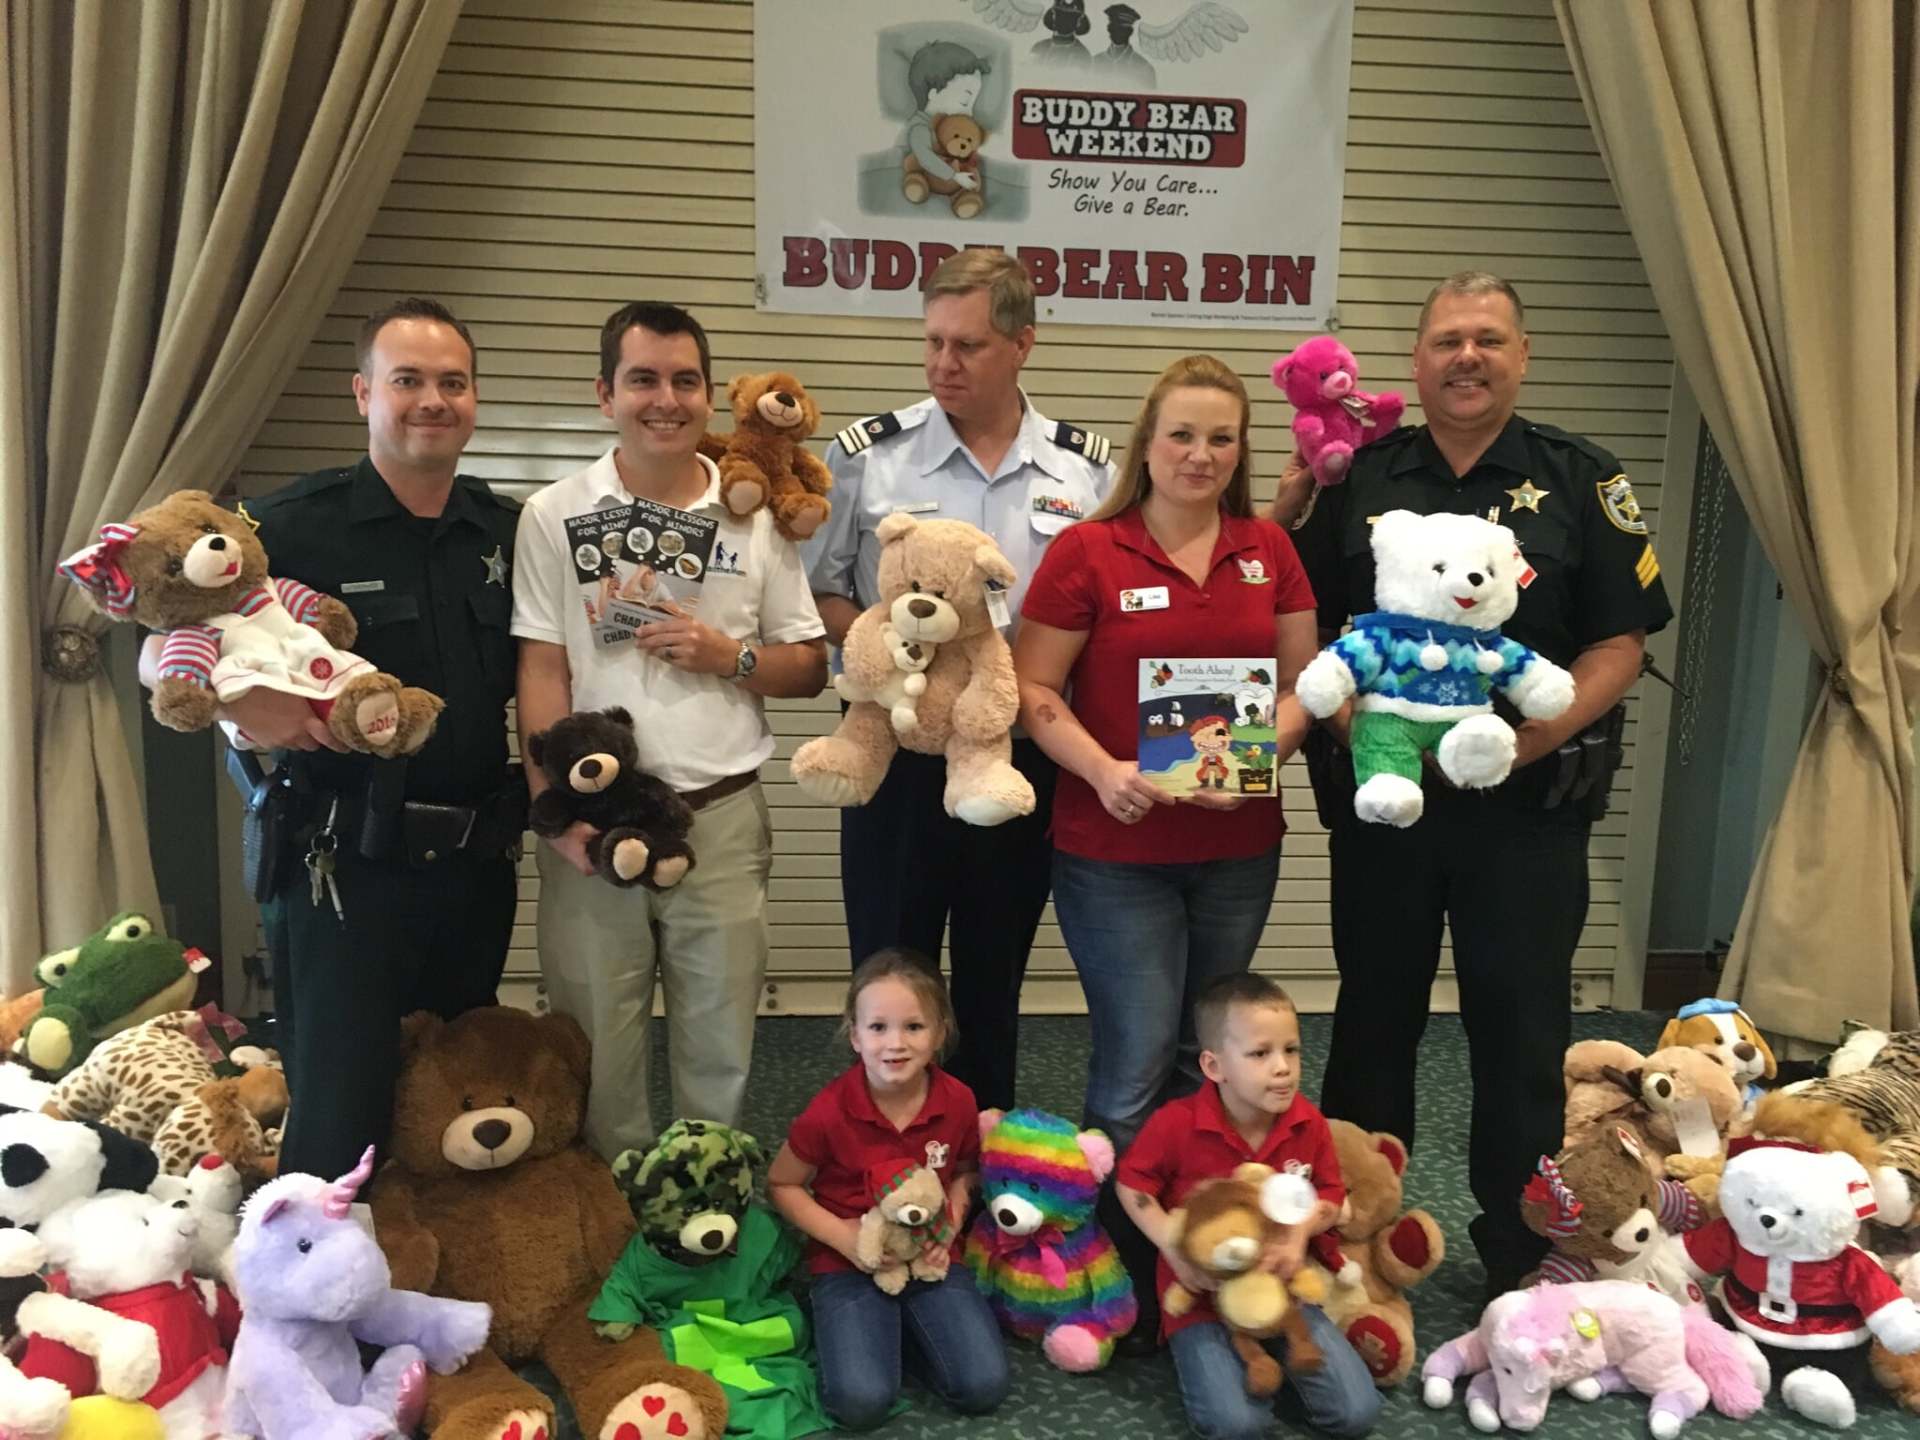 Buddy Bear® Exhibitor with the St. Lucie Country Sheriff's Department at the Buddy Bear® Bin